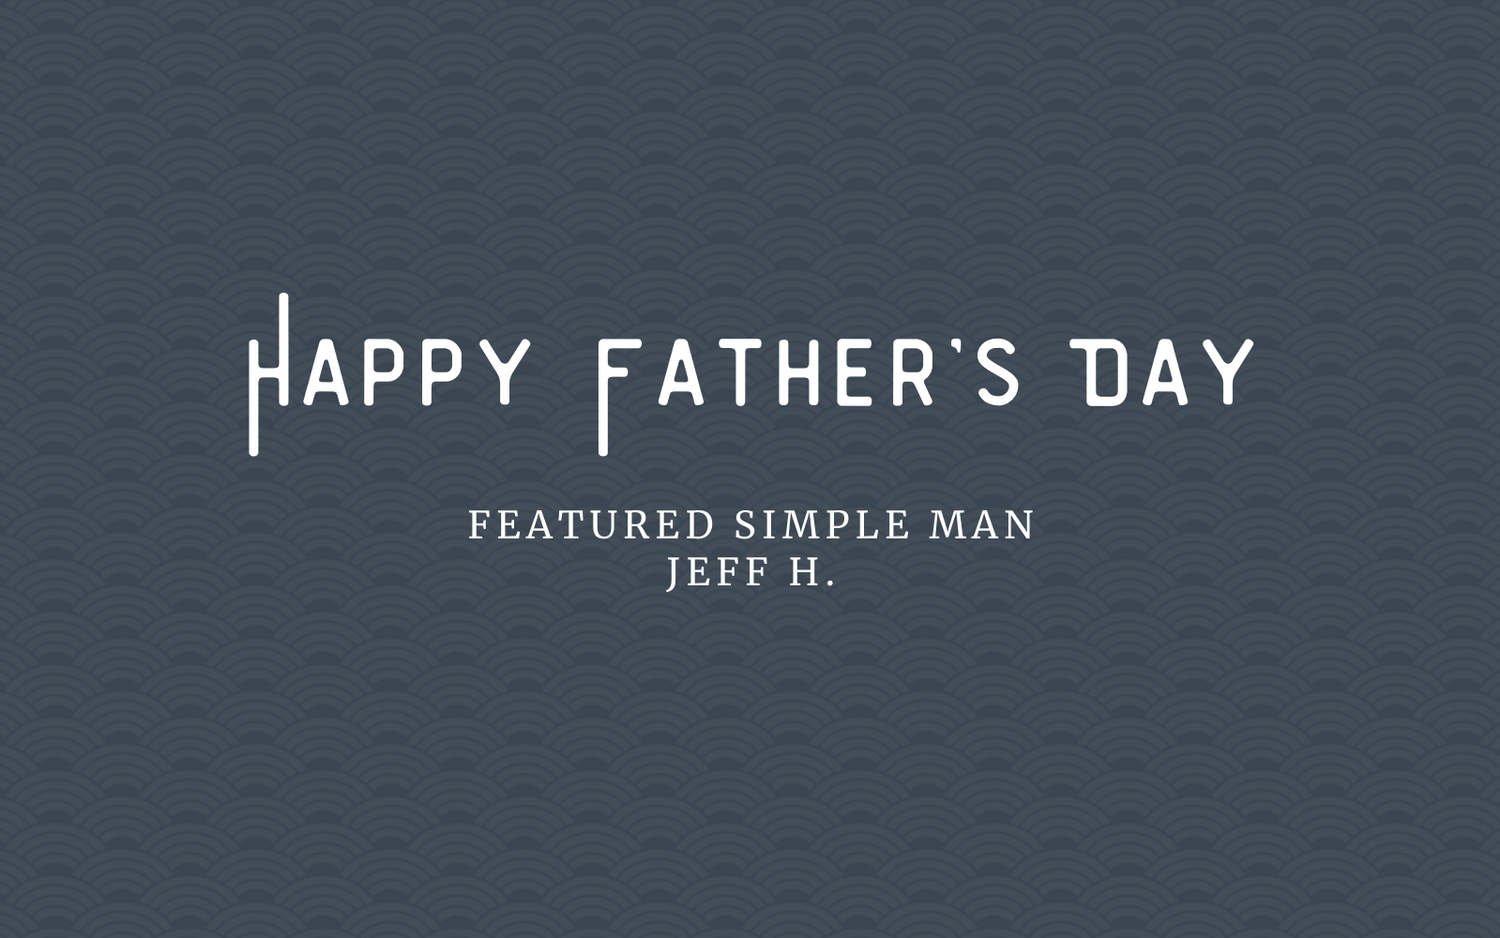 Featured Simple Man: Jeff H.